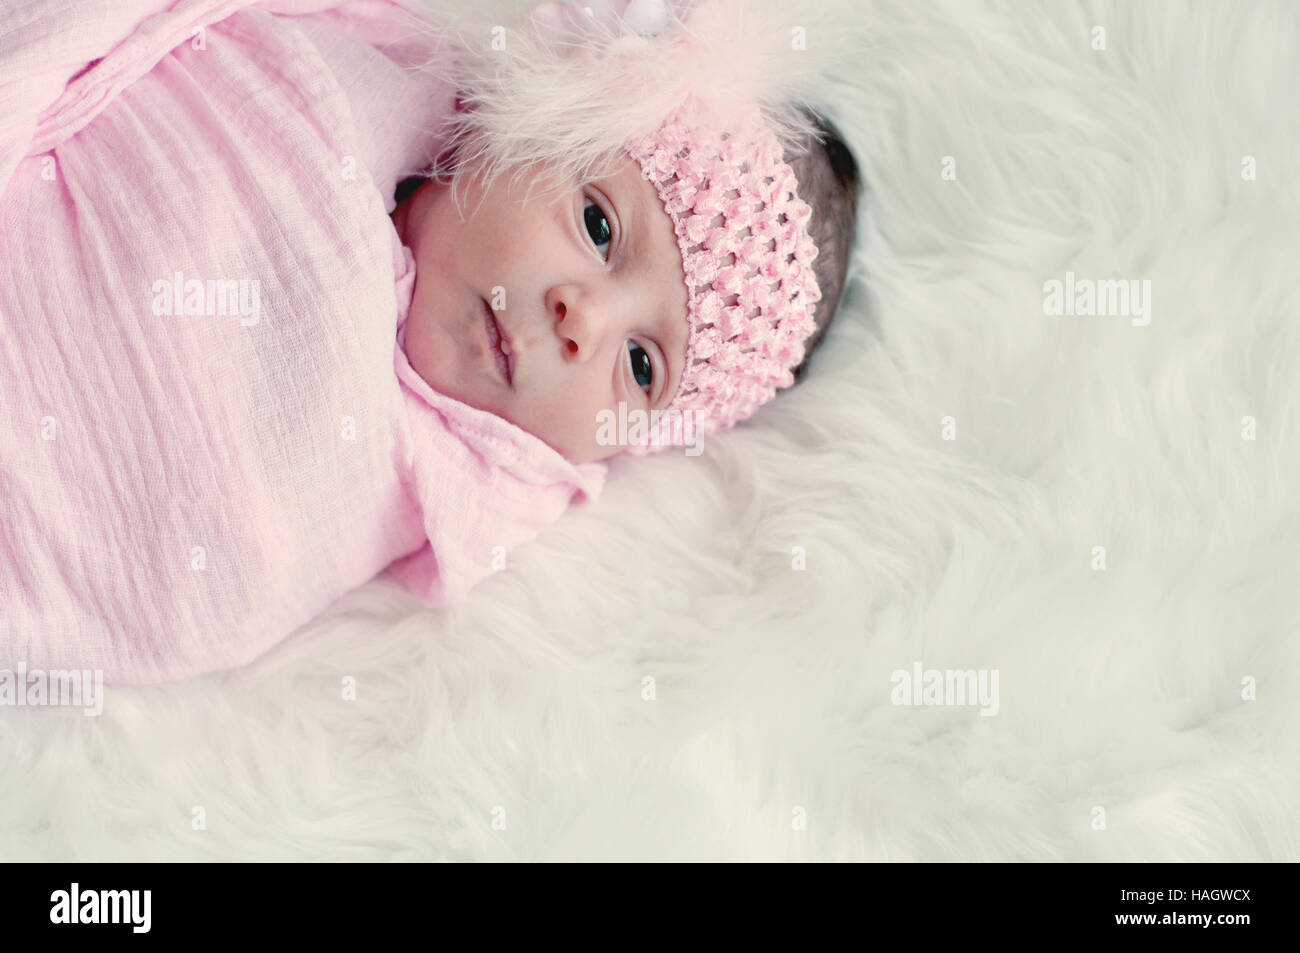 Newborn baby girl in pink headband laying on white fur with copy space. Stock Photo